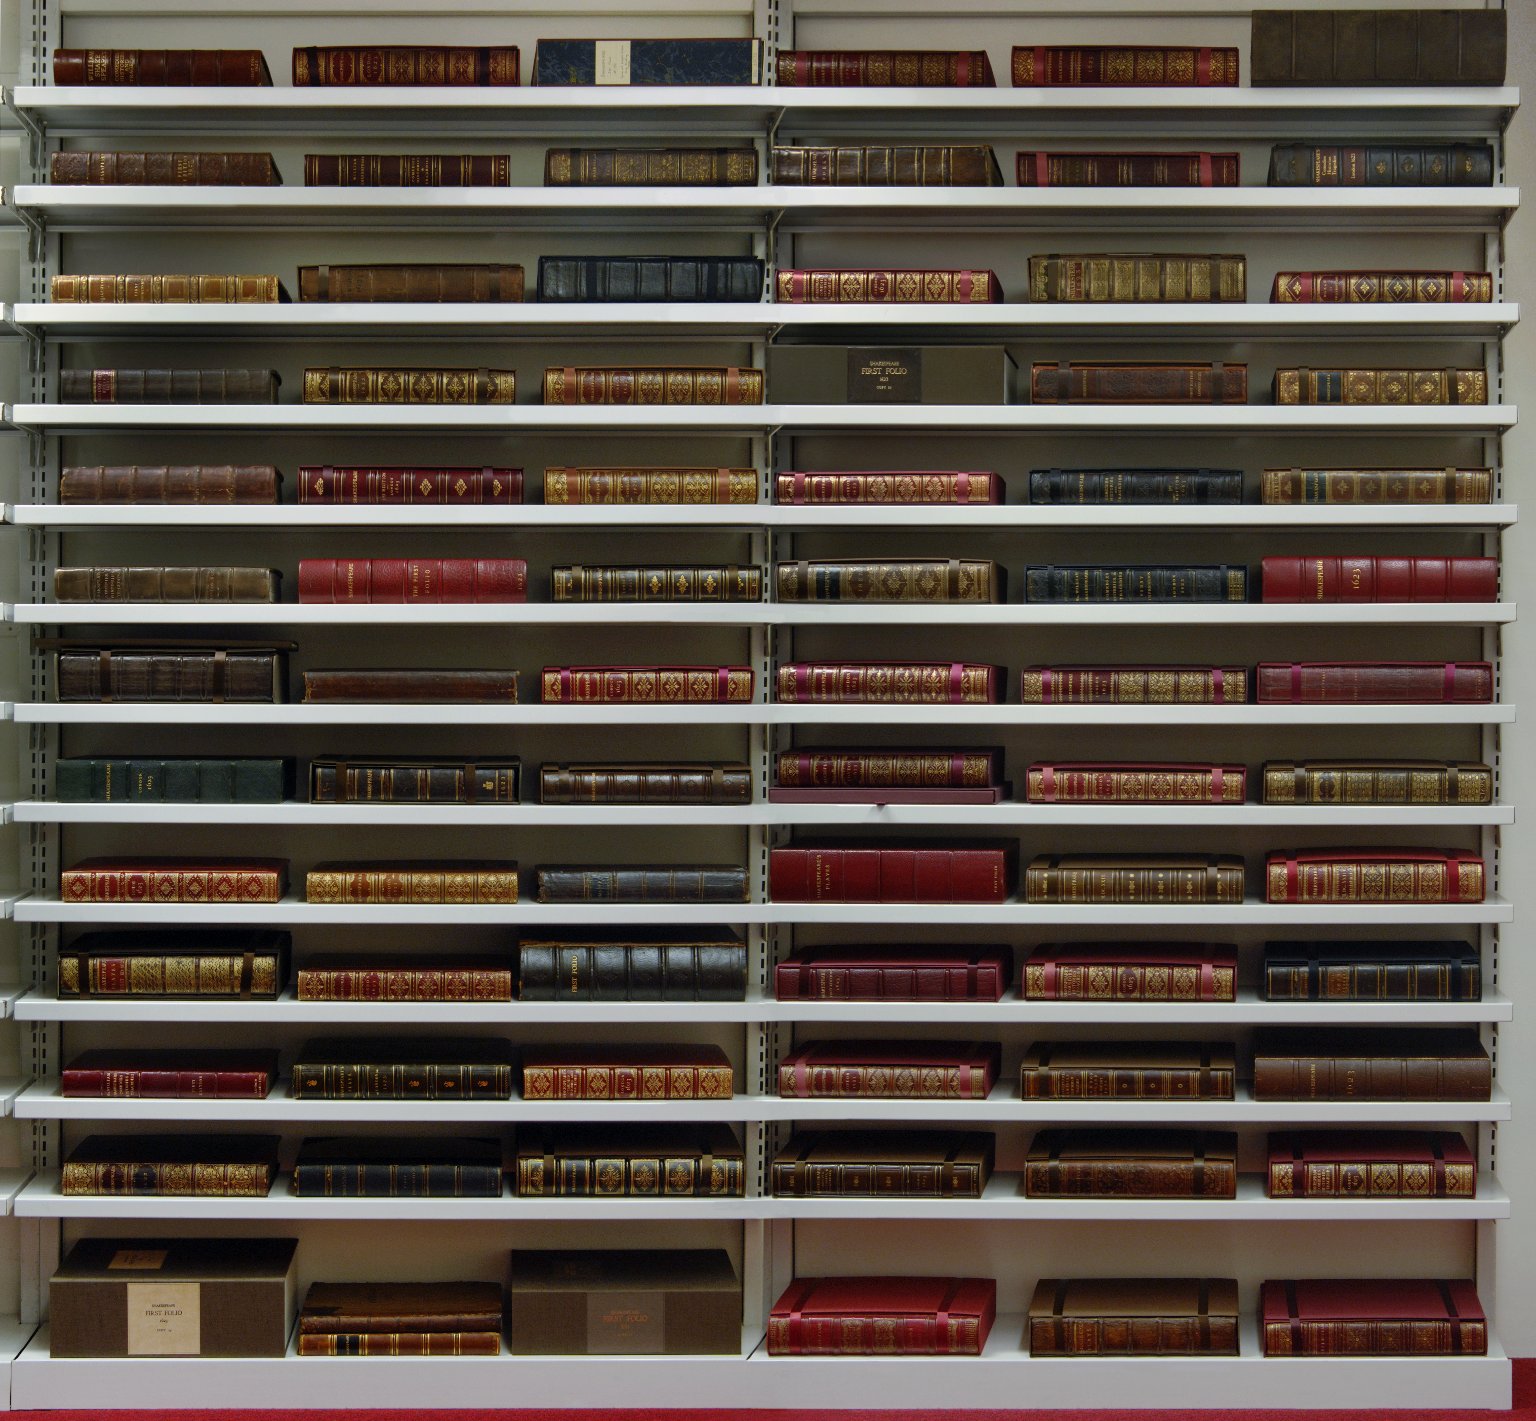 Julie Ainsworth, Folger collection of eighty-two First Folios in the STC vault. Used by permission of the Folger Shakespeare Library.